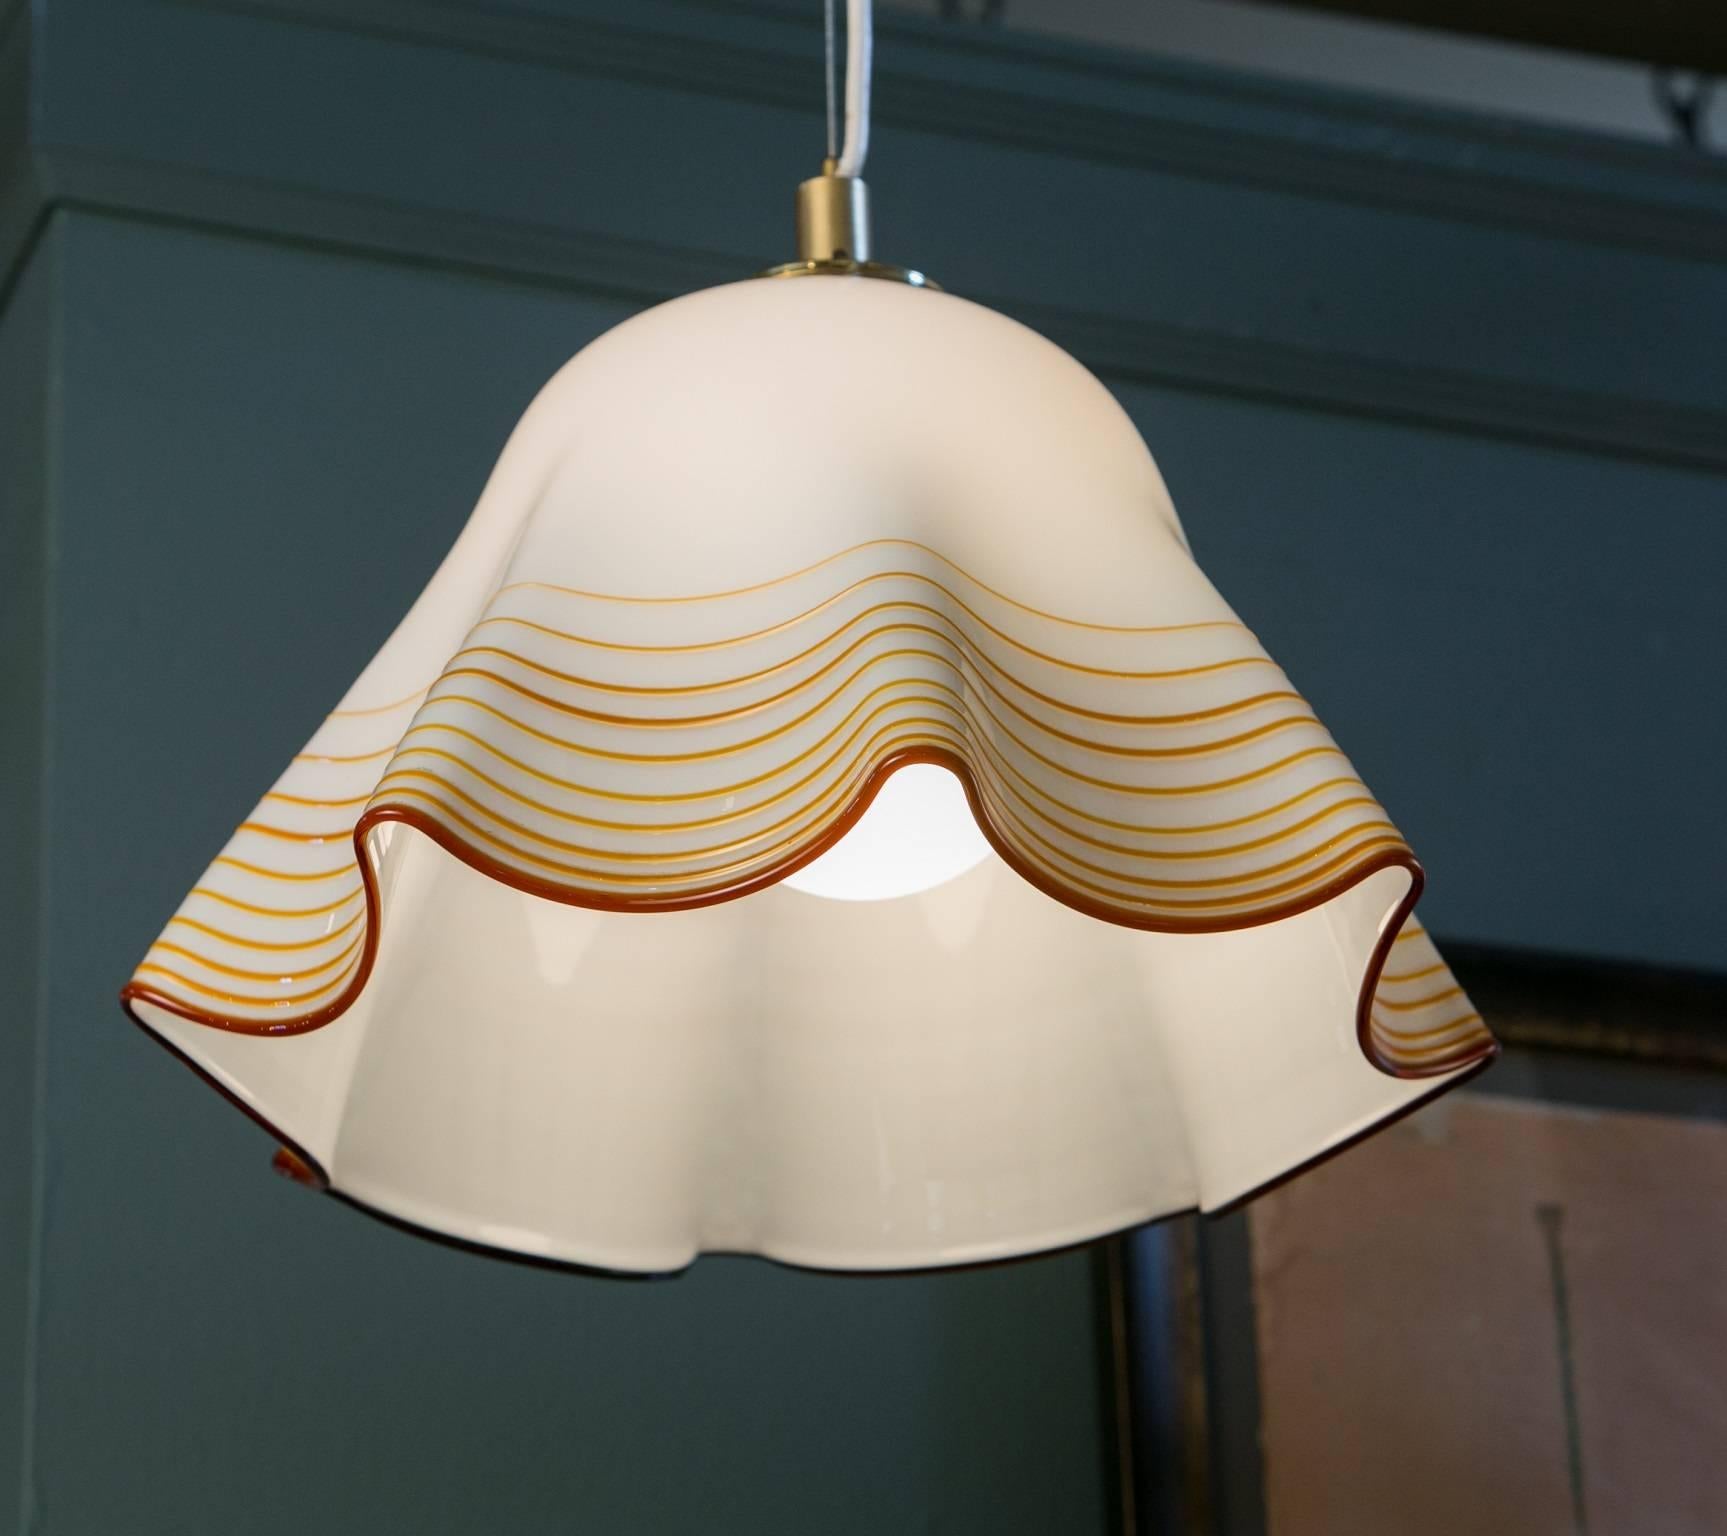 Handblown Murano glass pendant re-wired for the USA with a single Edison socket using UL-approved parts. Elegant white and caramel coloring with a fenicio technique, unattributed to Venini. Beautiful craftsmanship. Mid-Century Modern handkerchief